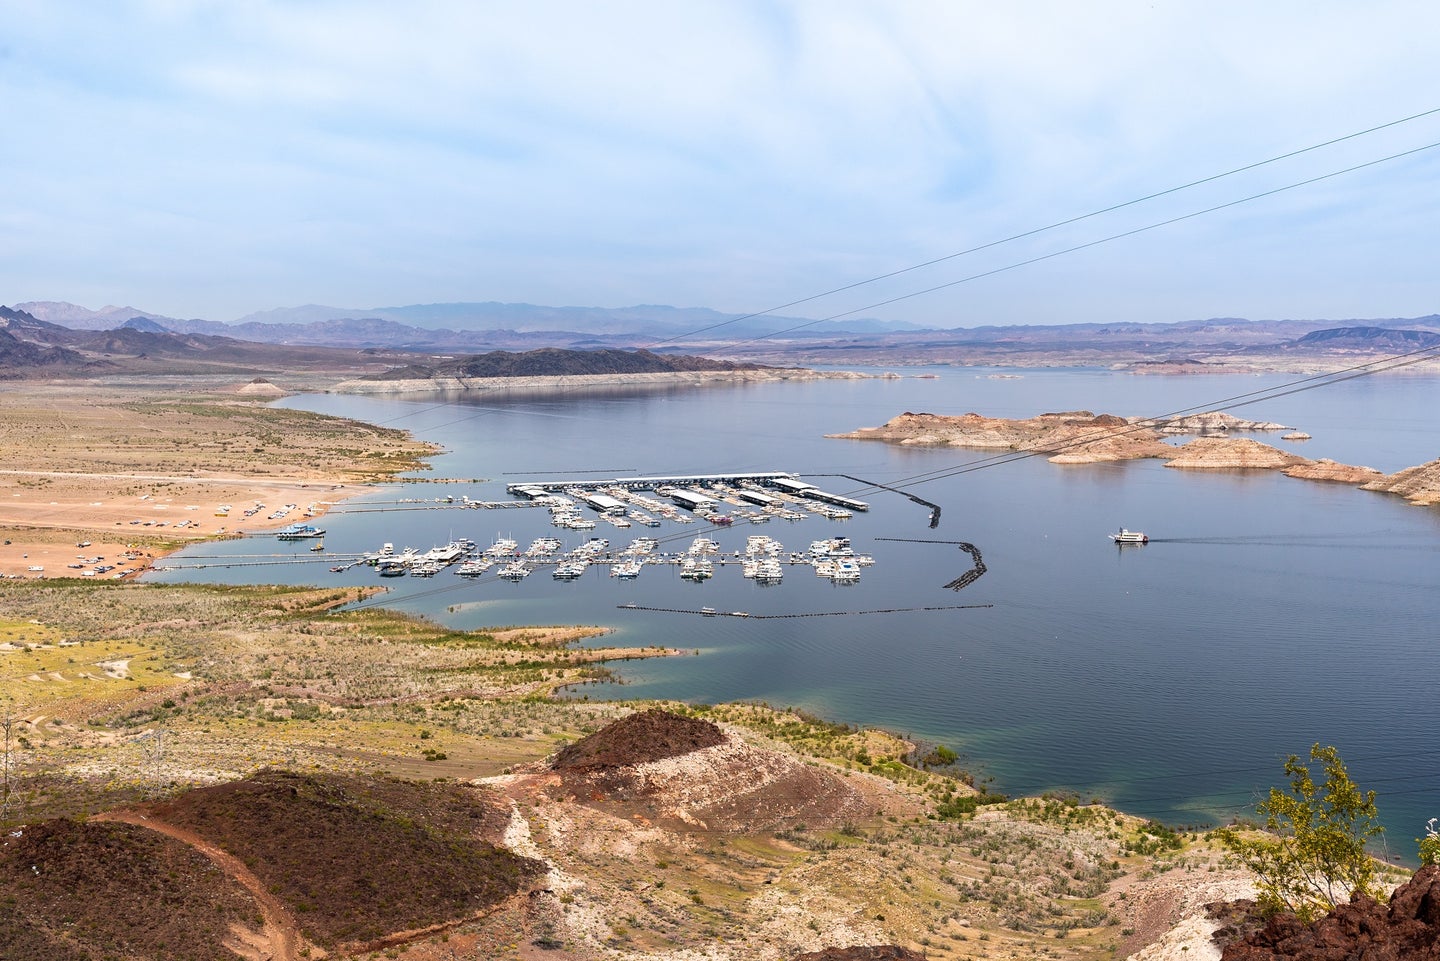 Lake Mead low water levels on the Colorado River